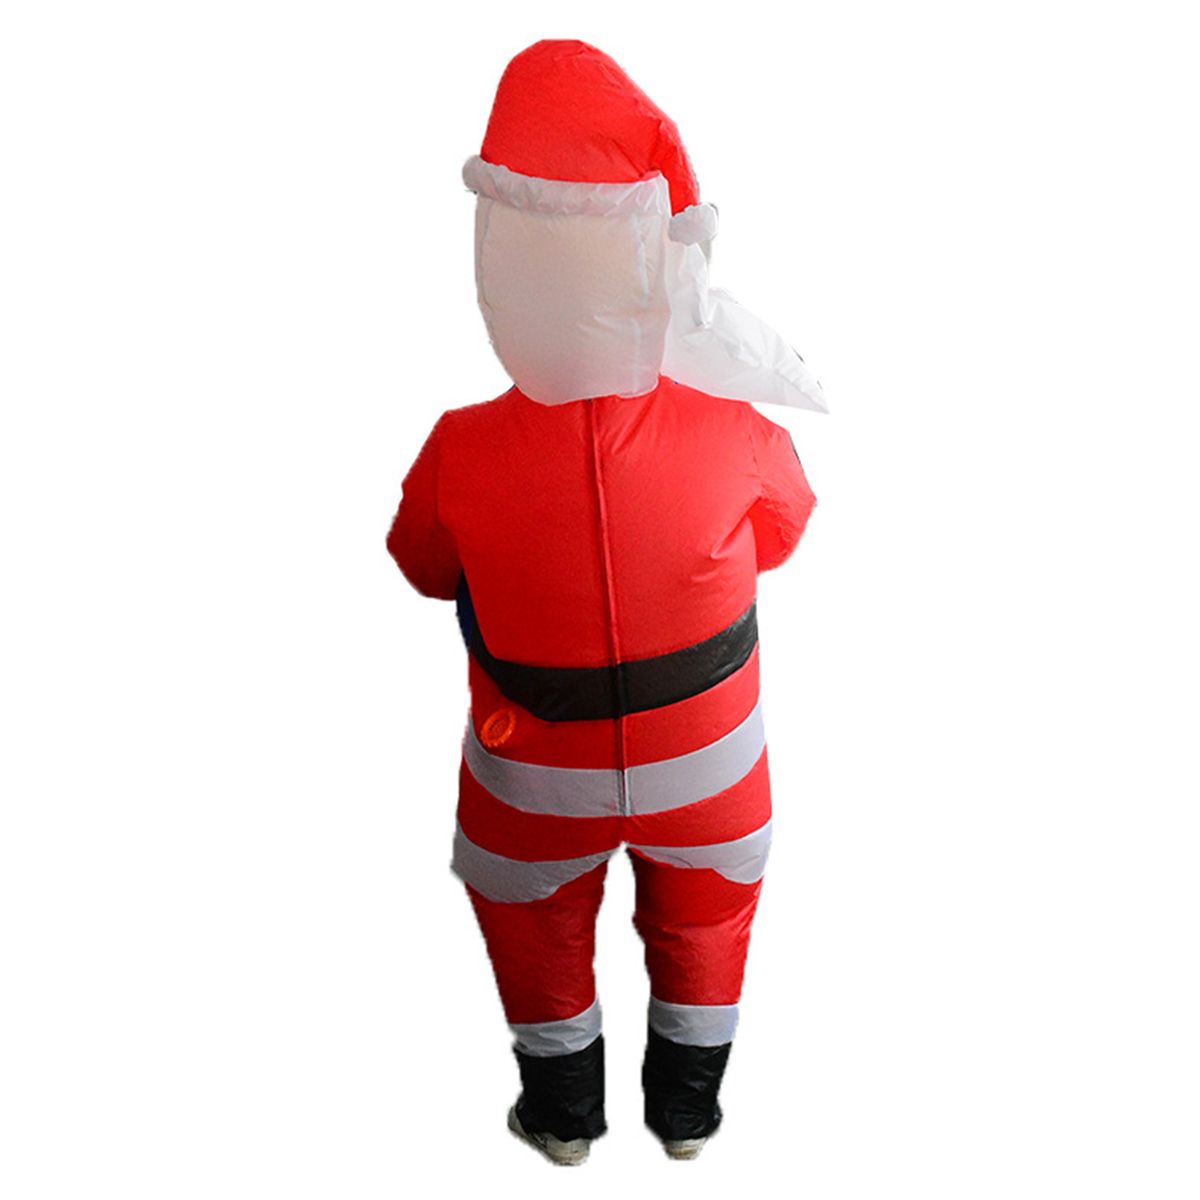 Scary-Halloween-Christmas-Man-Inflatable-Costume-Blow-Up-Suits-Party-Dress-Decorations-1565297